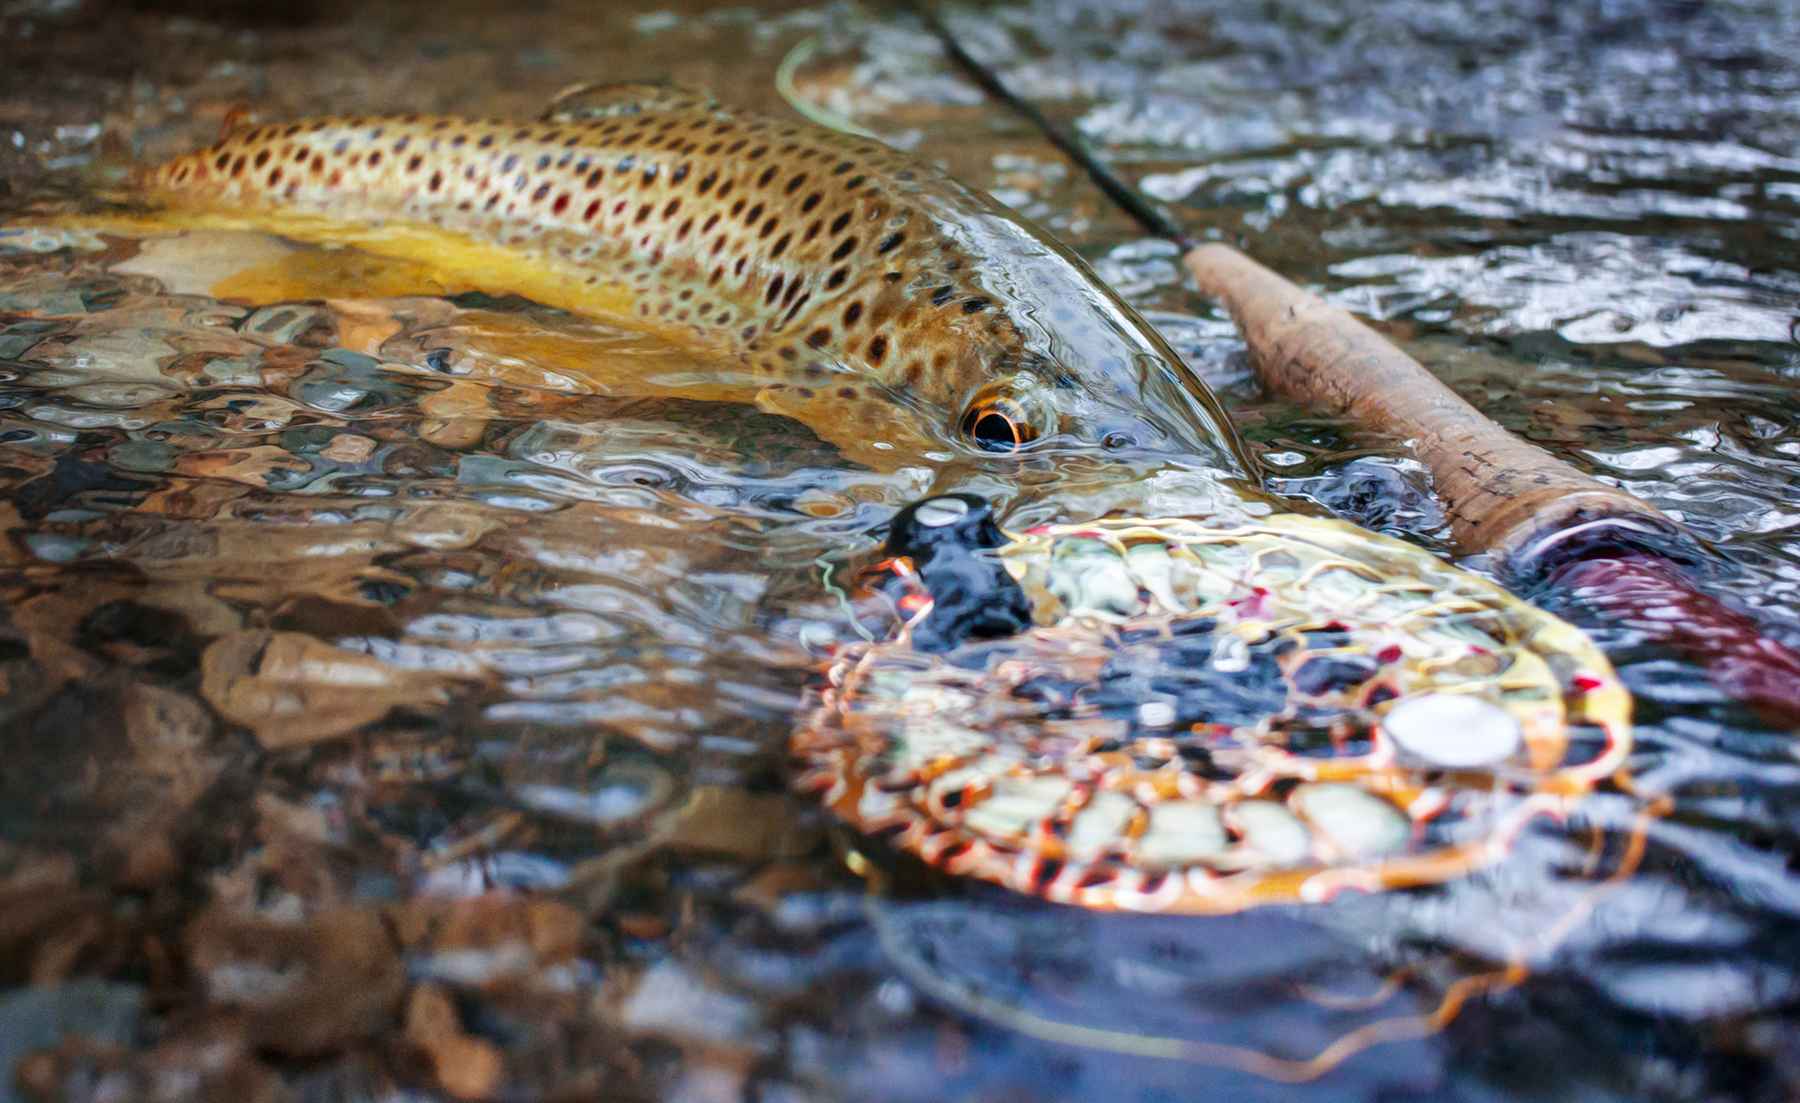 2014 Fly Fishing Photo Contest The Winners Hatch Magazine Fly